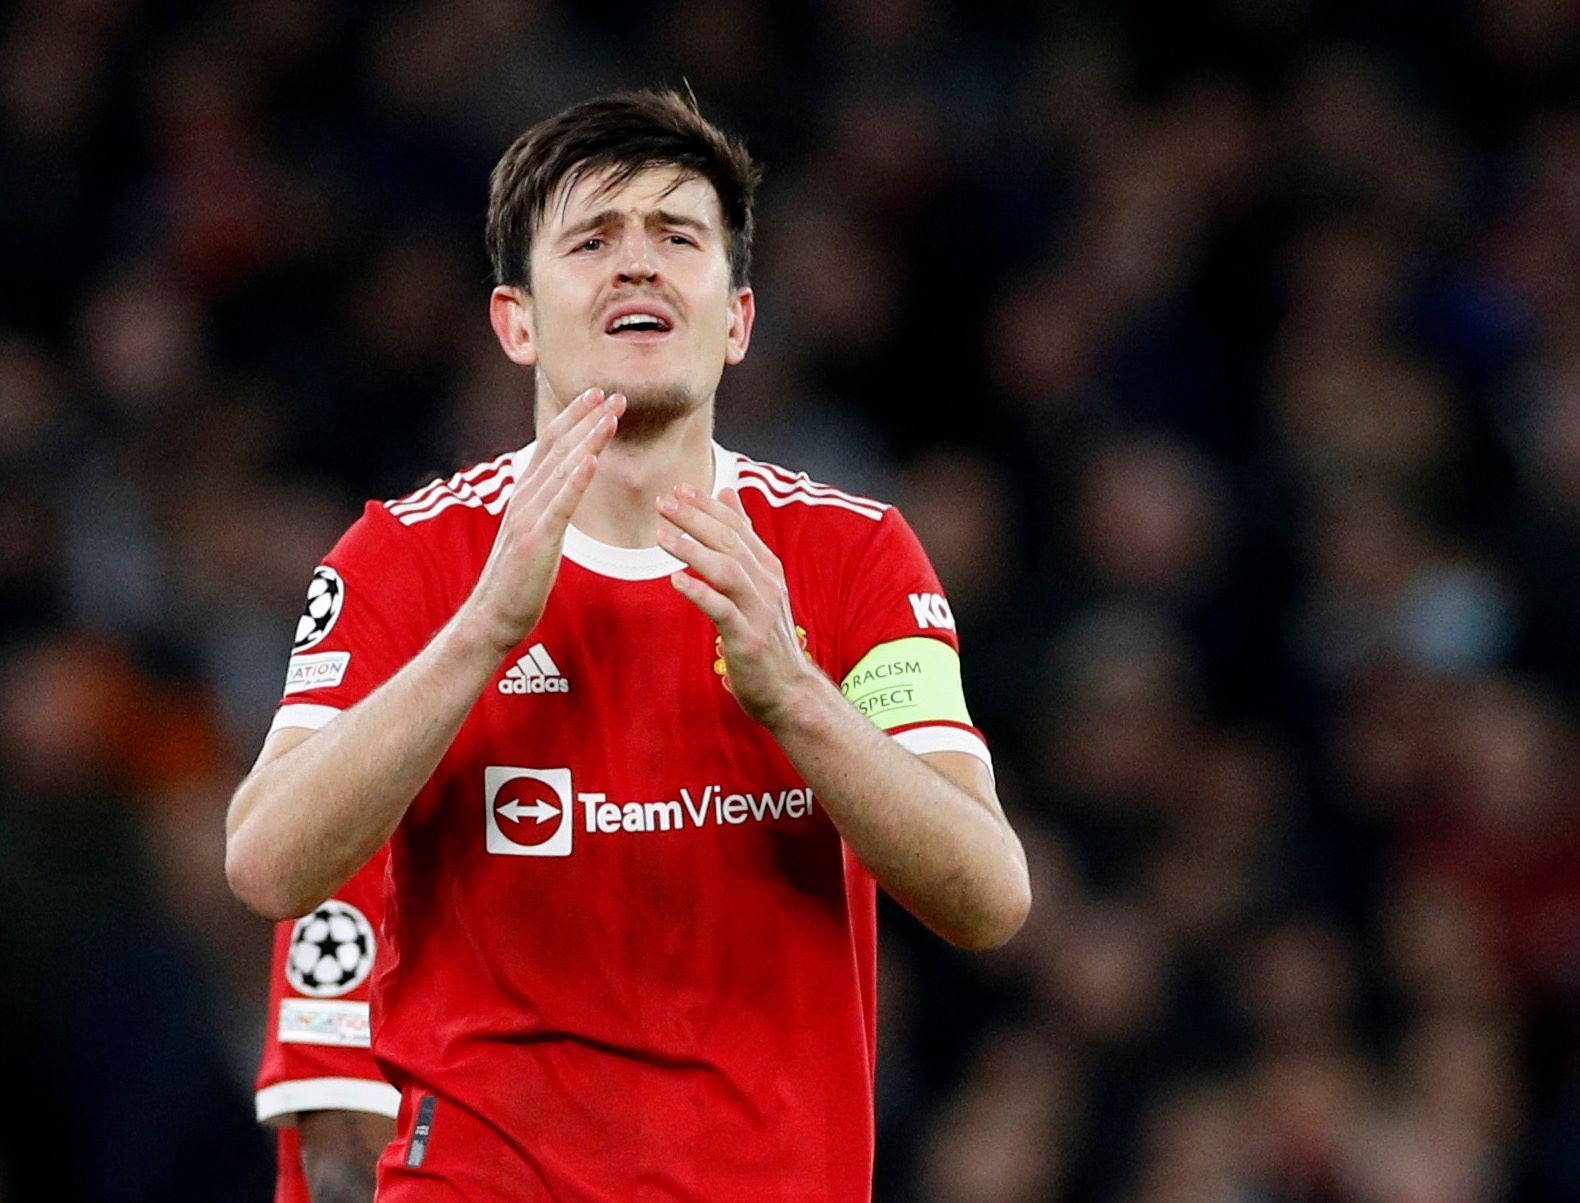 Soccer Football - Champions League - Group F - Manchester United v Atalanta - Old Trafford, Manchester, Britain - October 20, 2021 Manchester United's Harry Maguire reacts REUTERS/Phil Noble